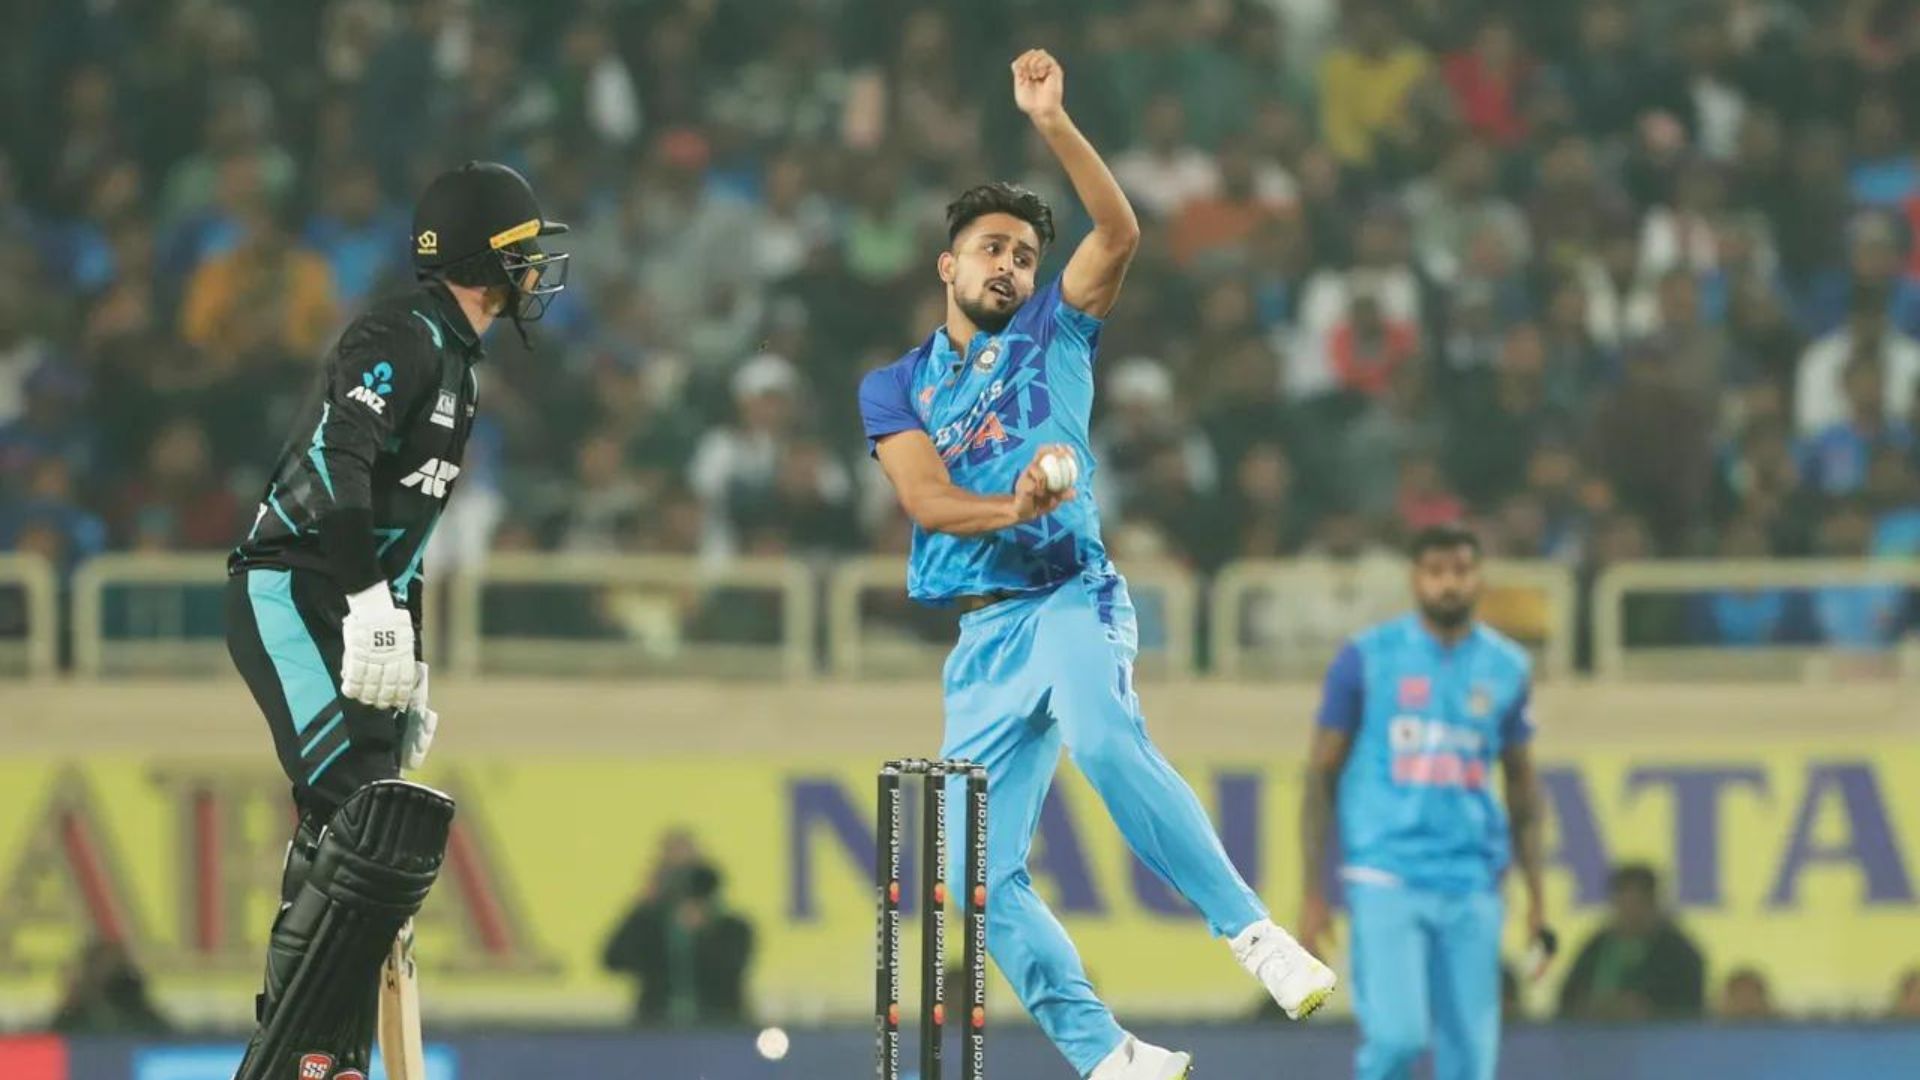 Umran Malik had a forgettable outing in Ranchi. (P.C.:BCCi)